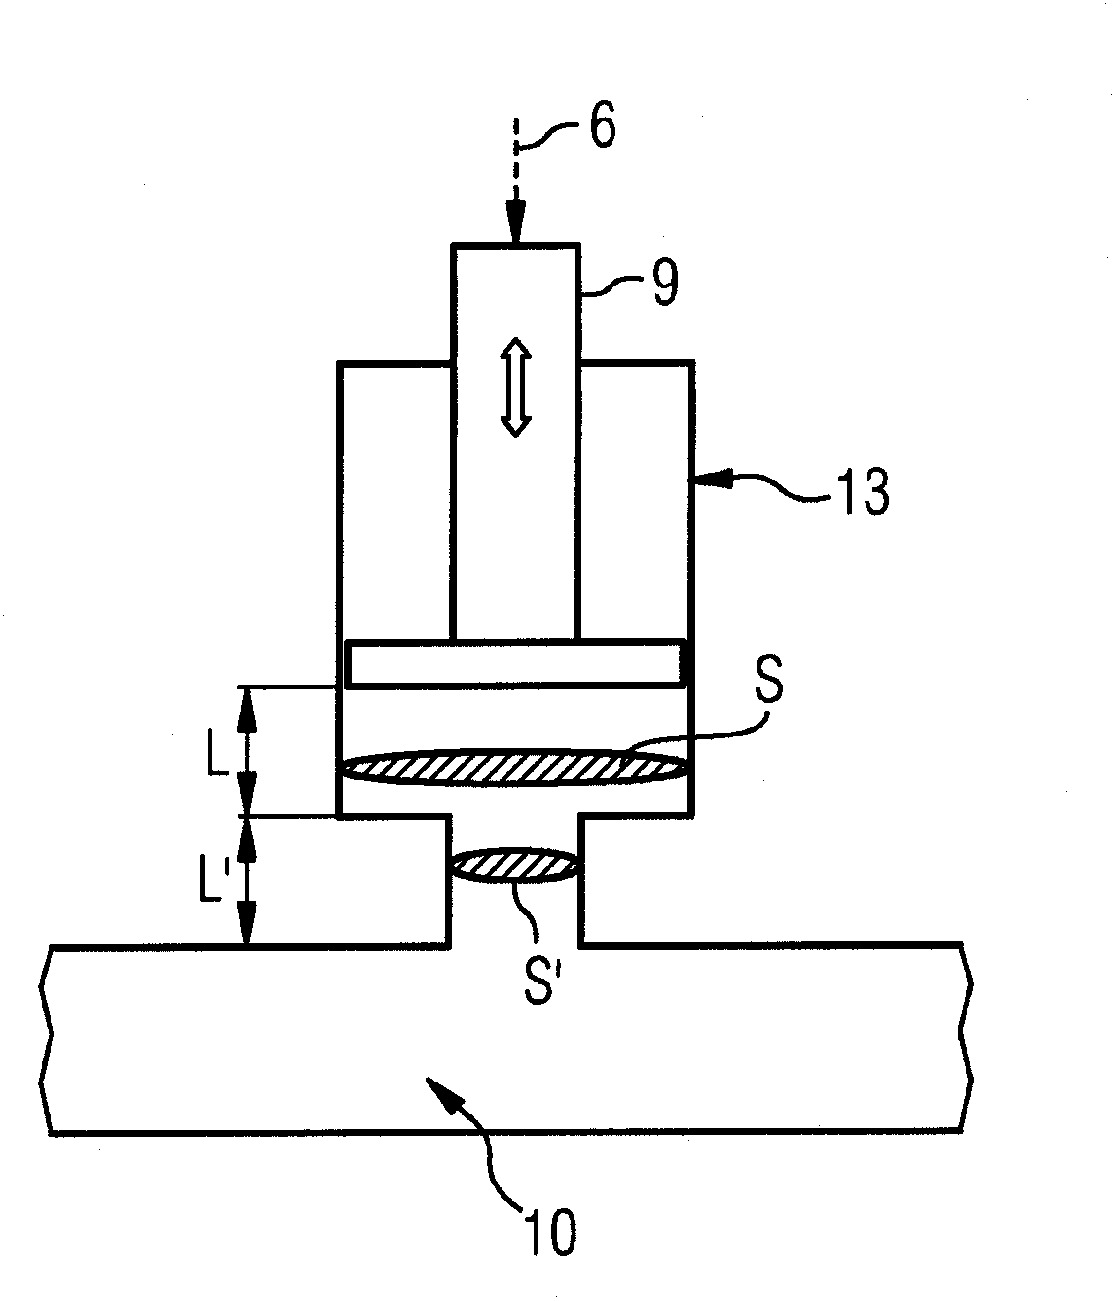 Method and device for the semi-active reduction of pressure oscillations in a hydraulic system